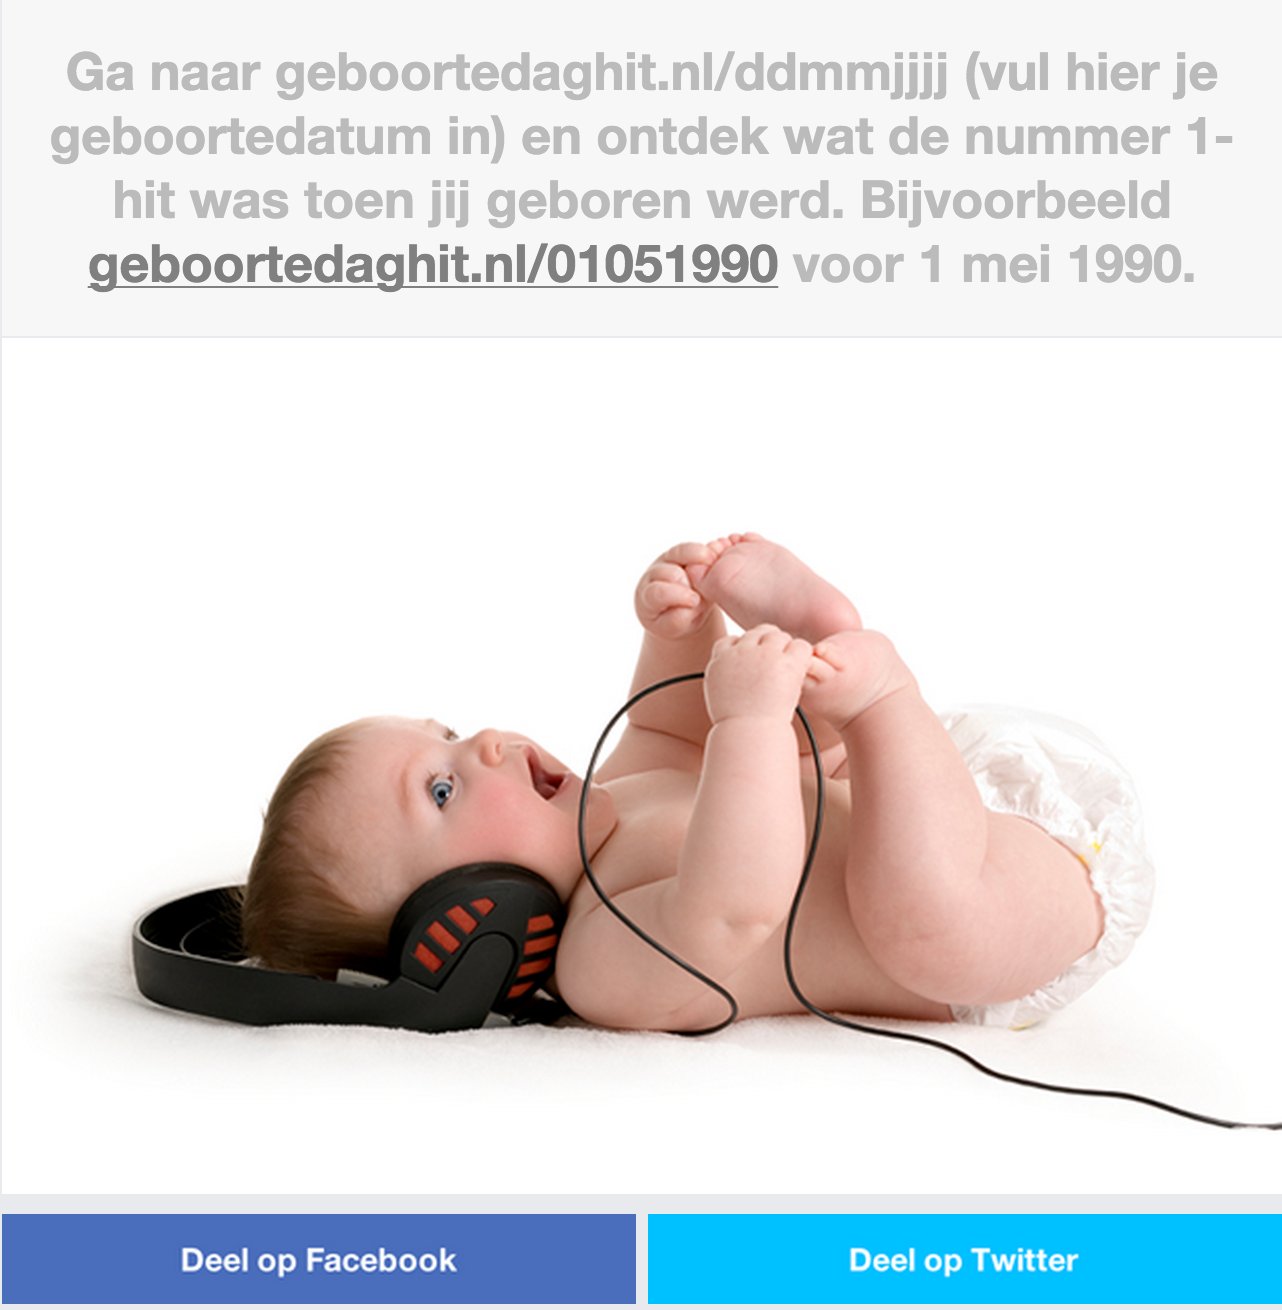 screenshot of a website with a similar purpose to Porktrack, with a picture of a baby wearing headphones and text in the Dutch language